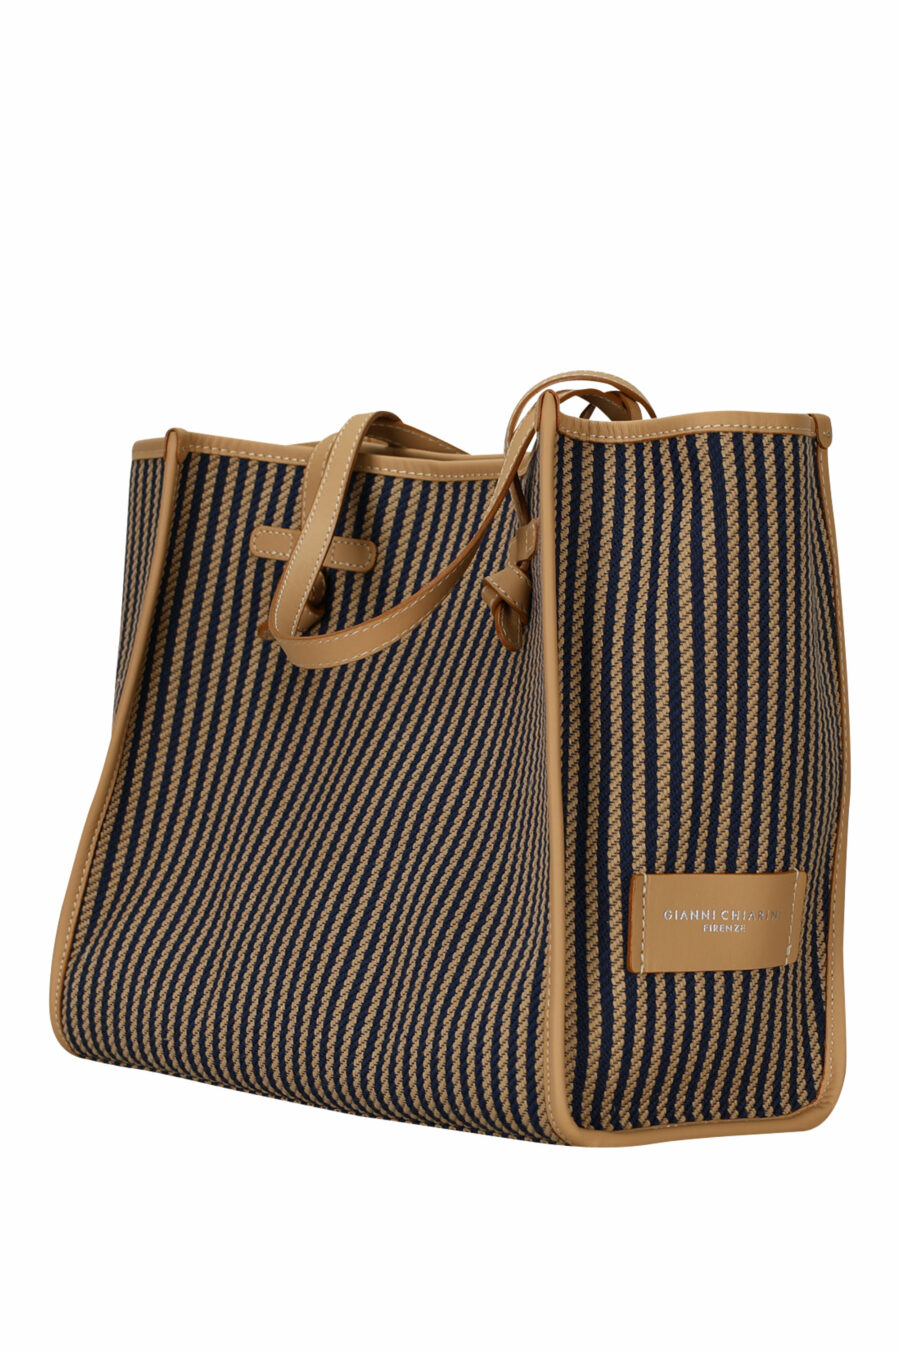 Shopper bag "Marcella" brown with dark blue lines and minilogo - 8057145894331 1